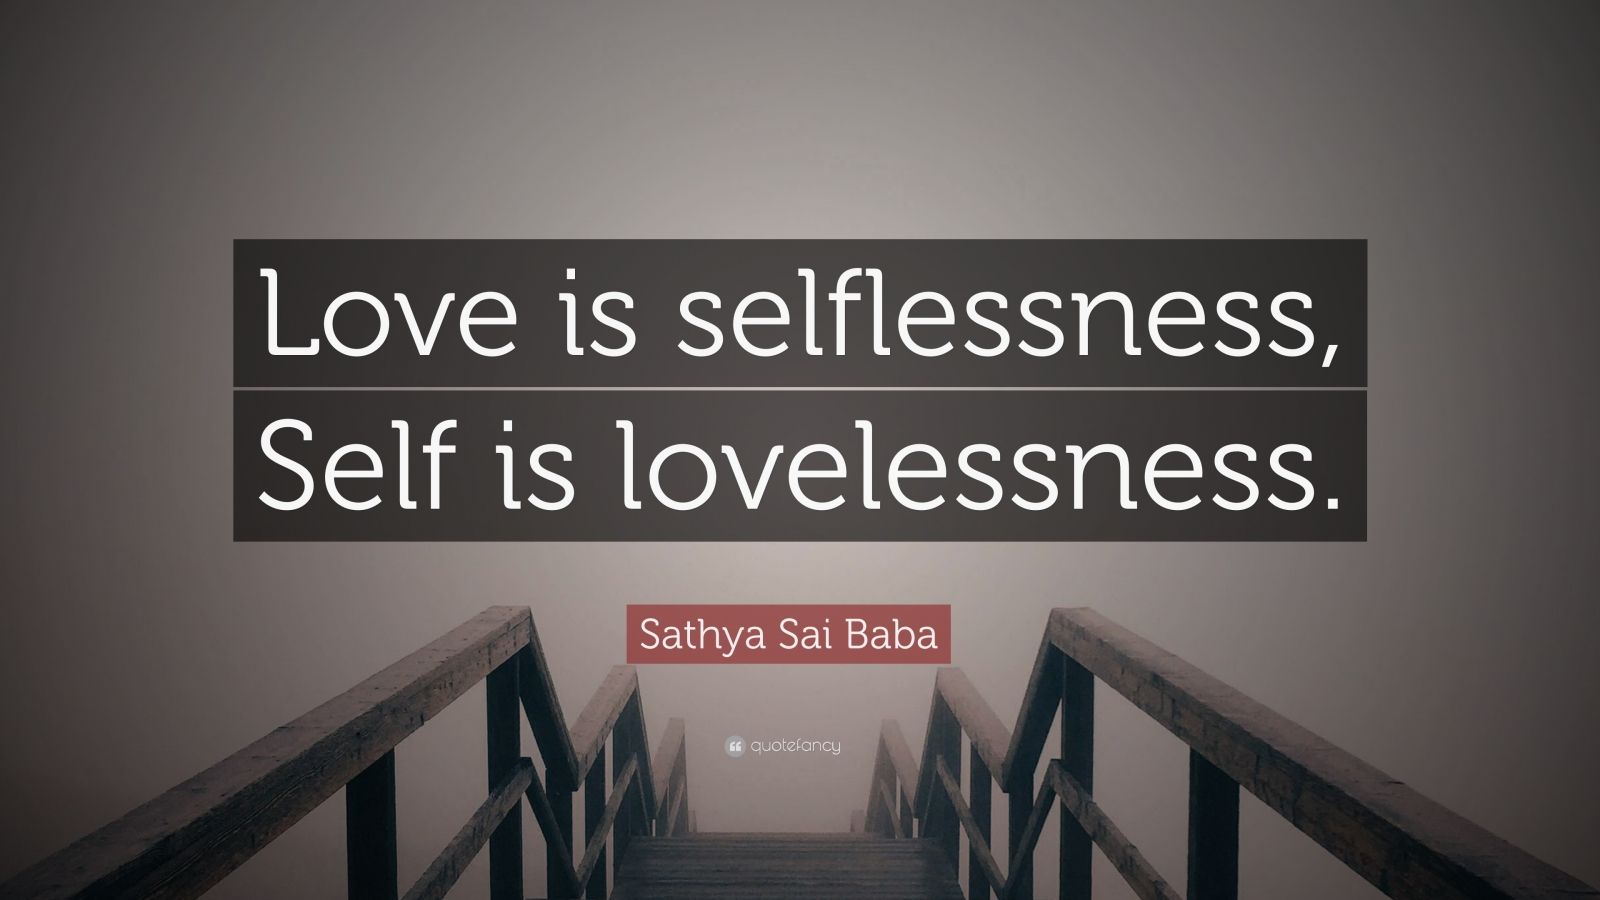 Sathya Sai Baba Quote: “Love is selflessness, Self is lovelessness.” (7 ...